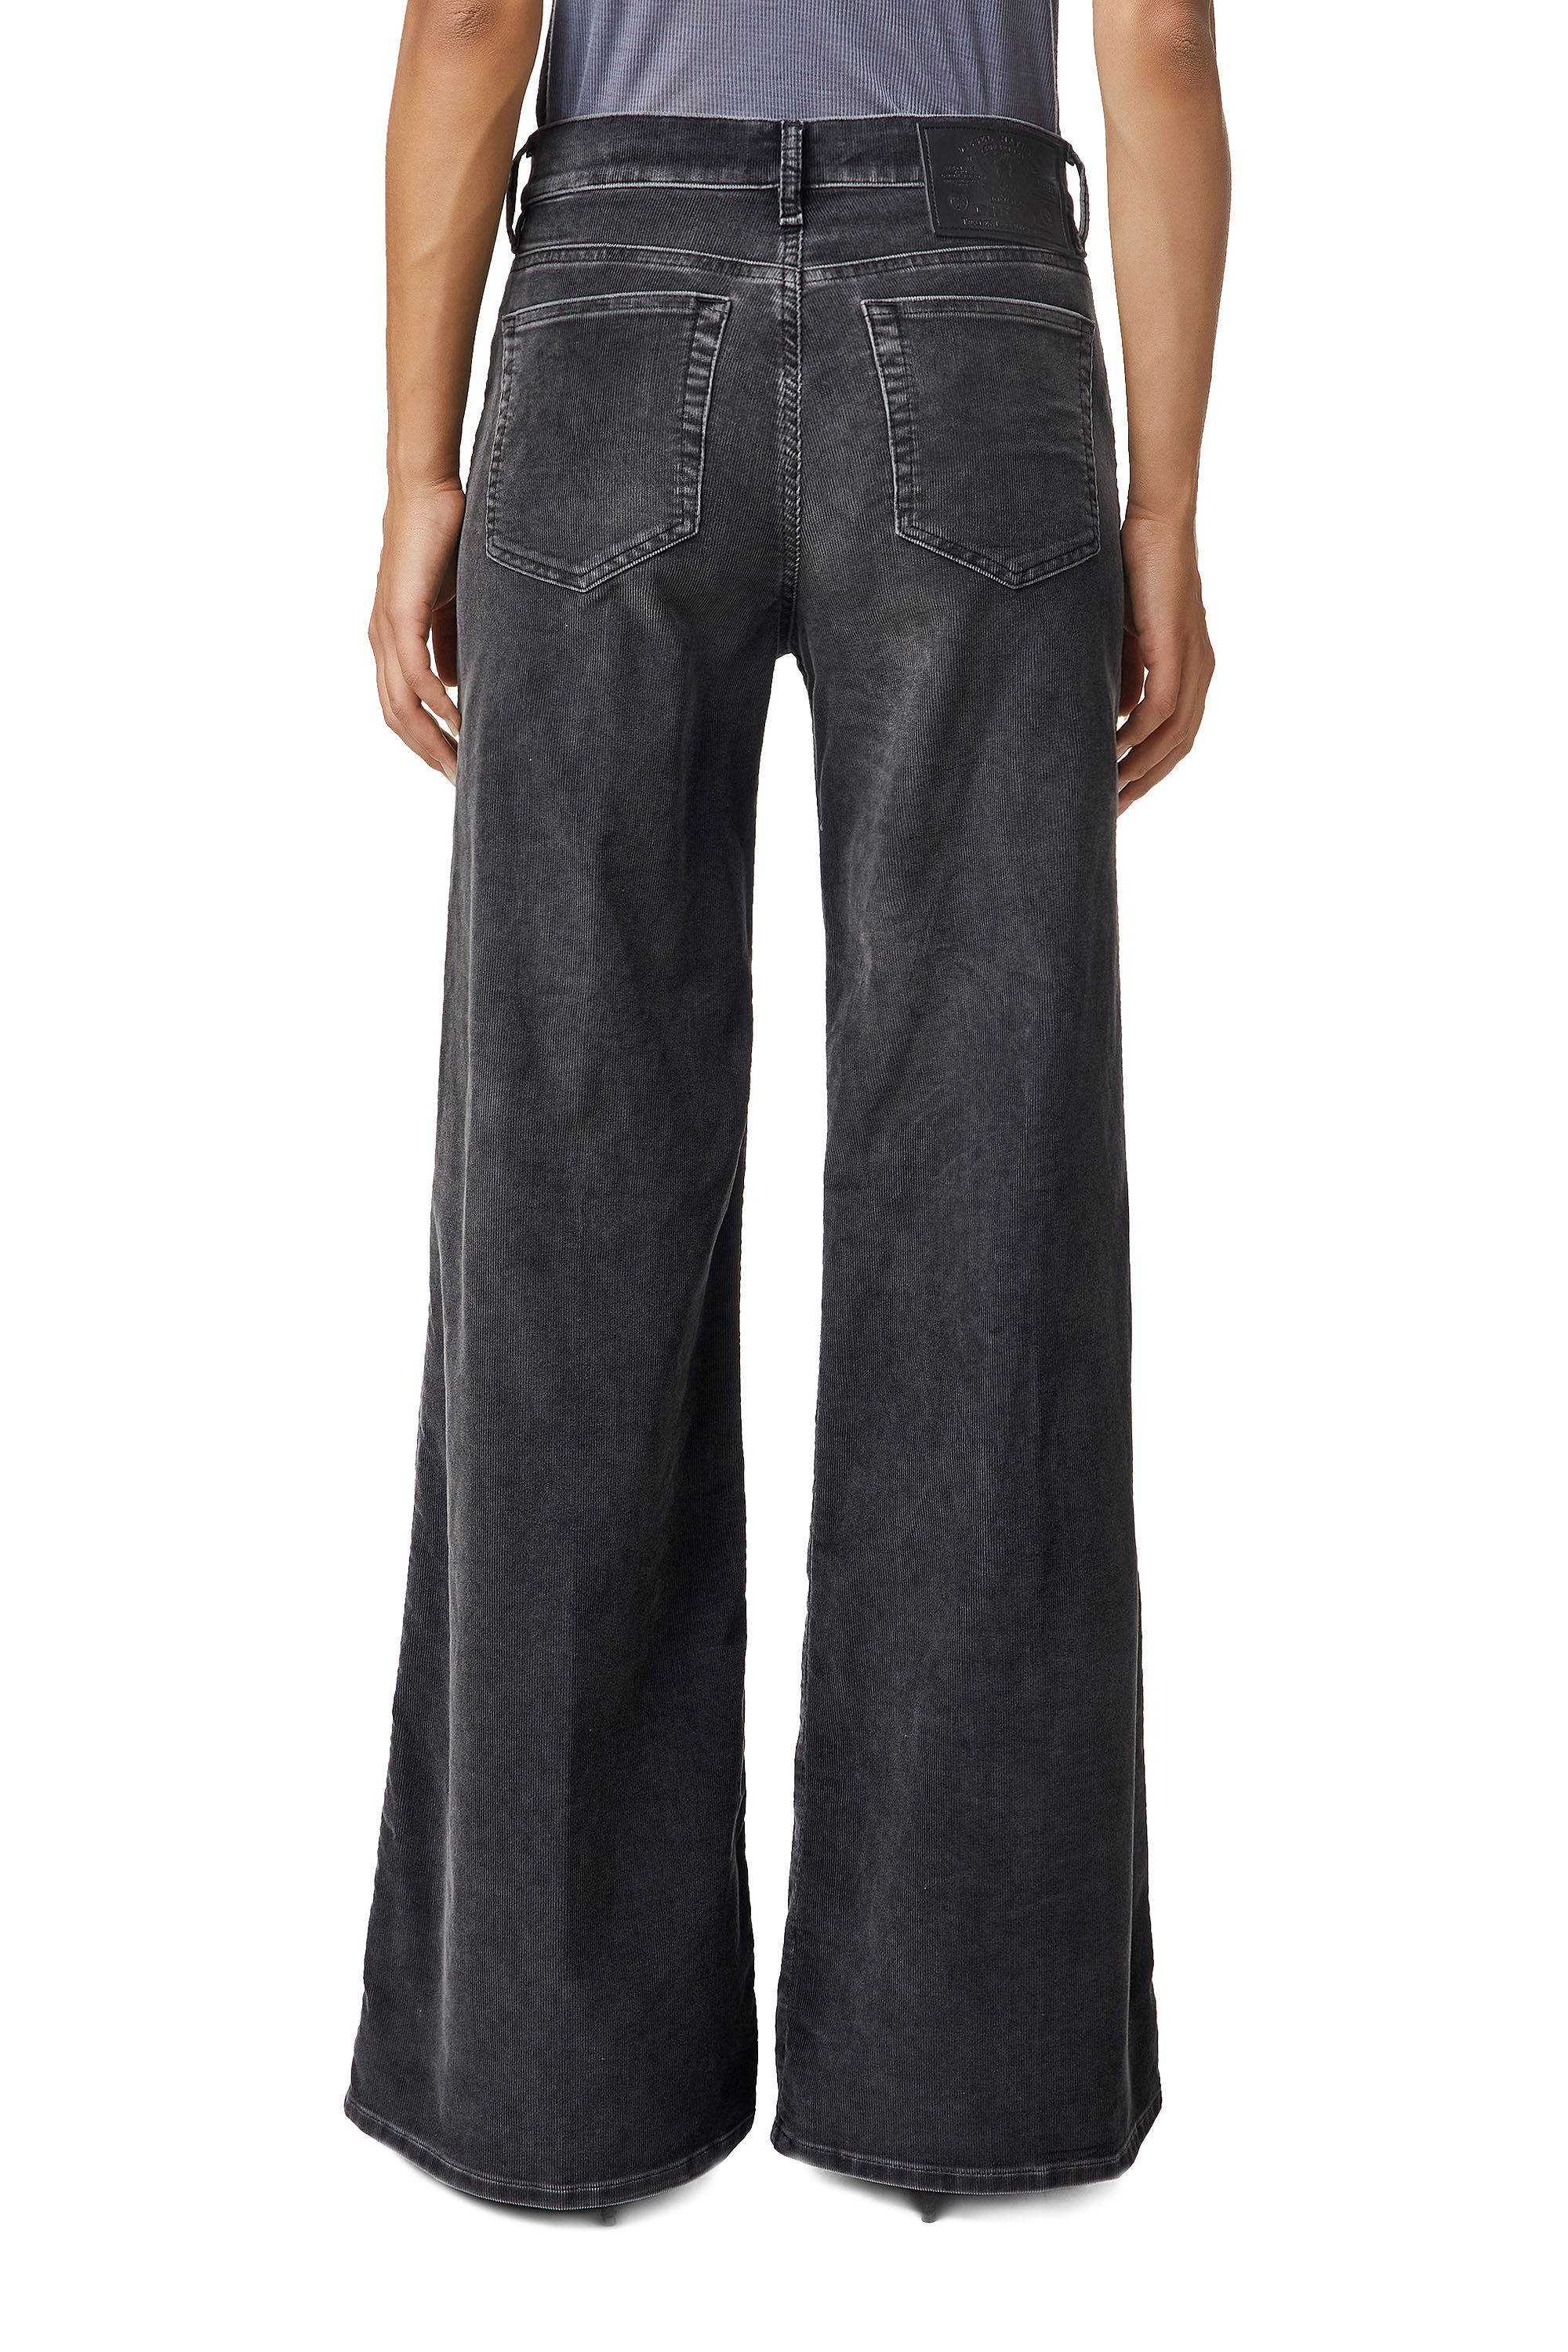 Diesel - D-Akemi 069YA Bootcut and Flare Jeans,  - Image 5